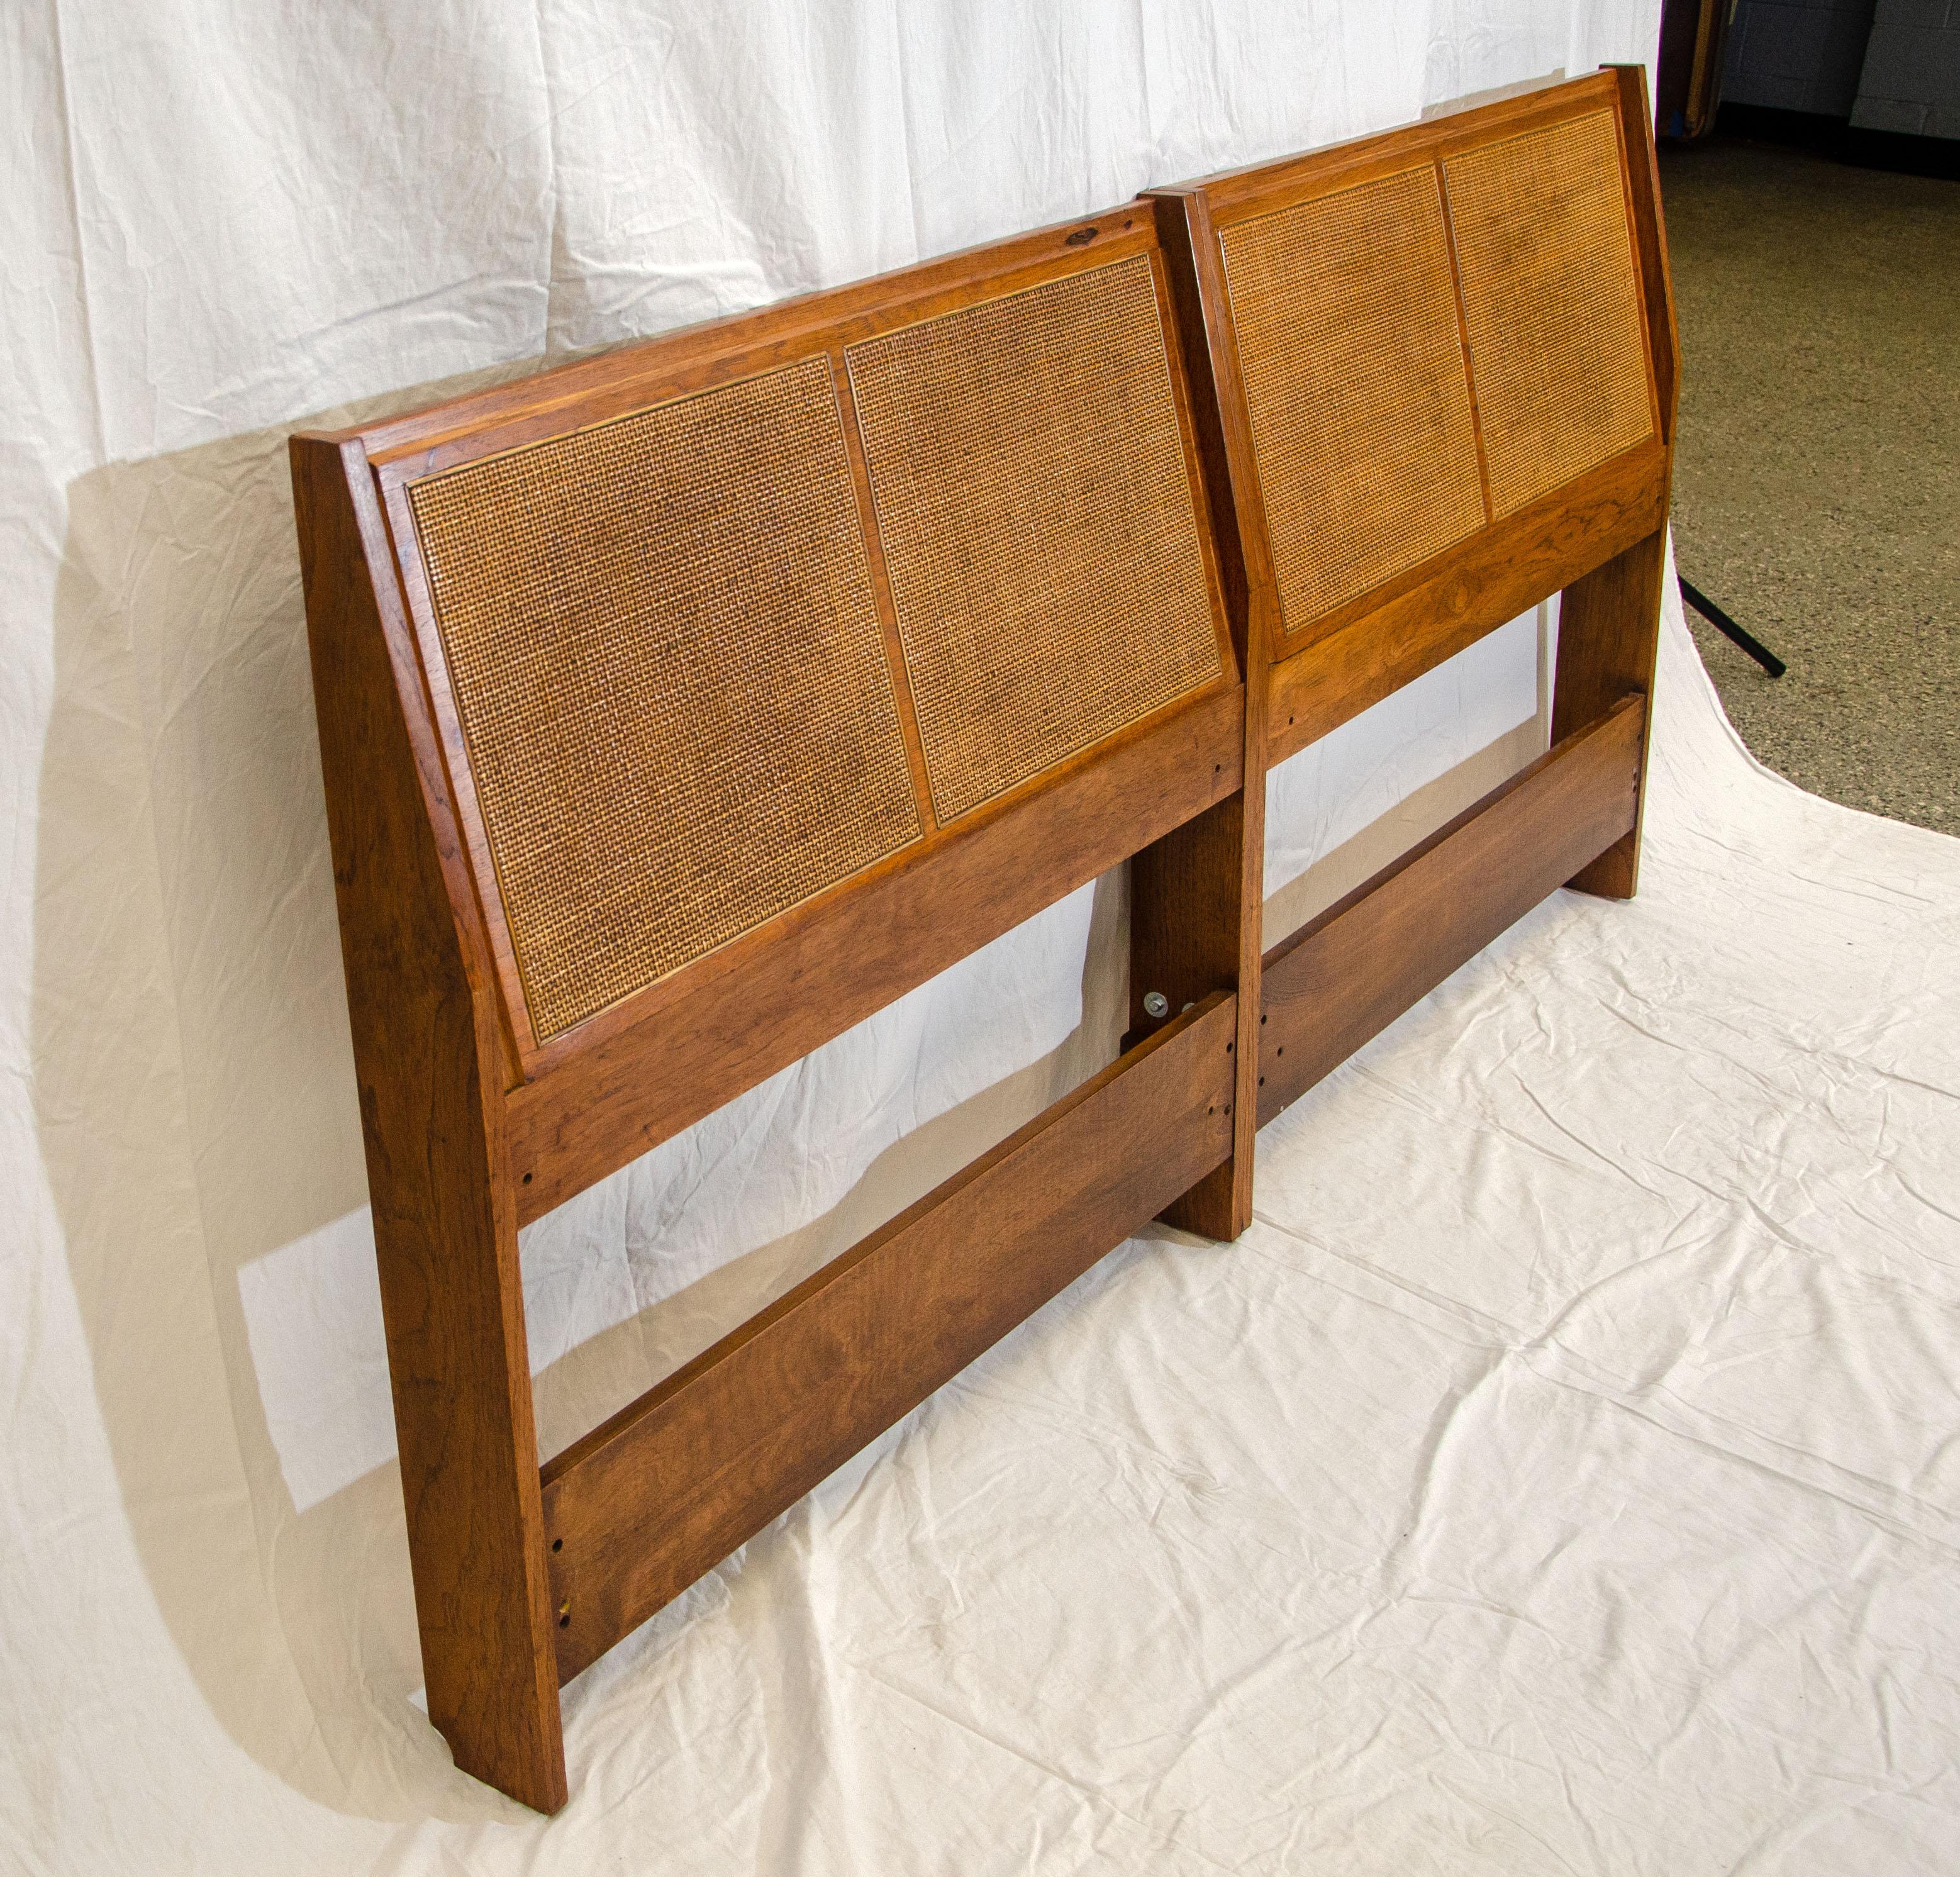 This original pair of twin size headboards were joined together to be used as a king size headboard. The headboard can also be split back into twin headboards by removing five bolts, a very versatile piece of furniture. The caning is original and in